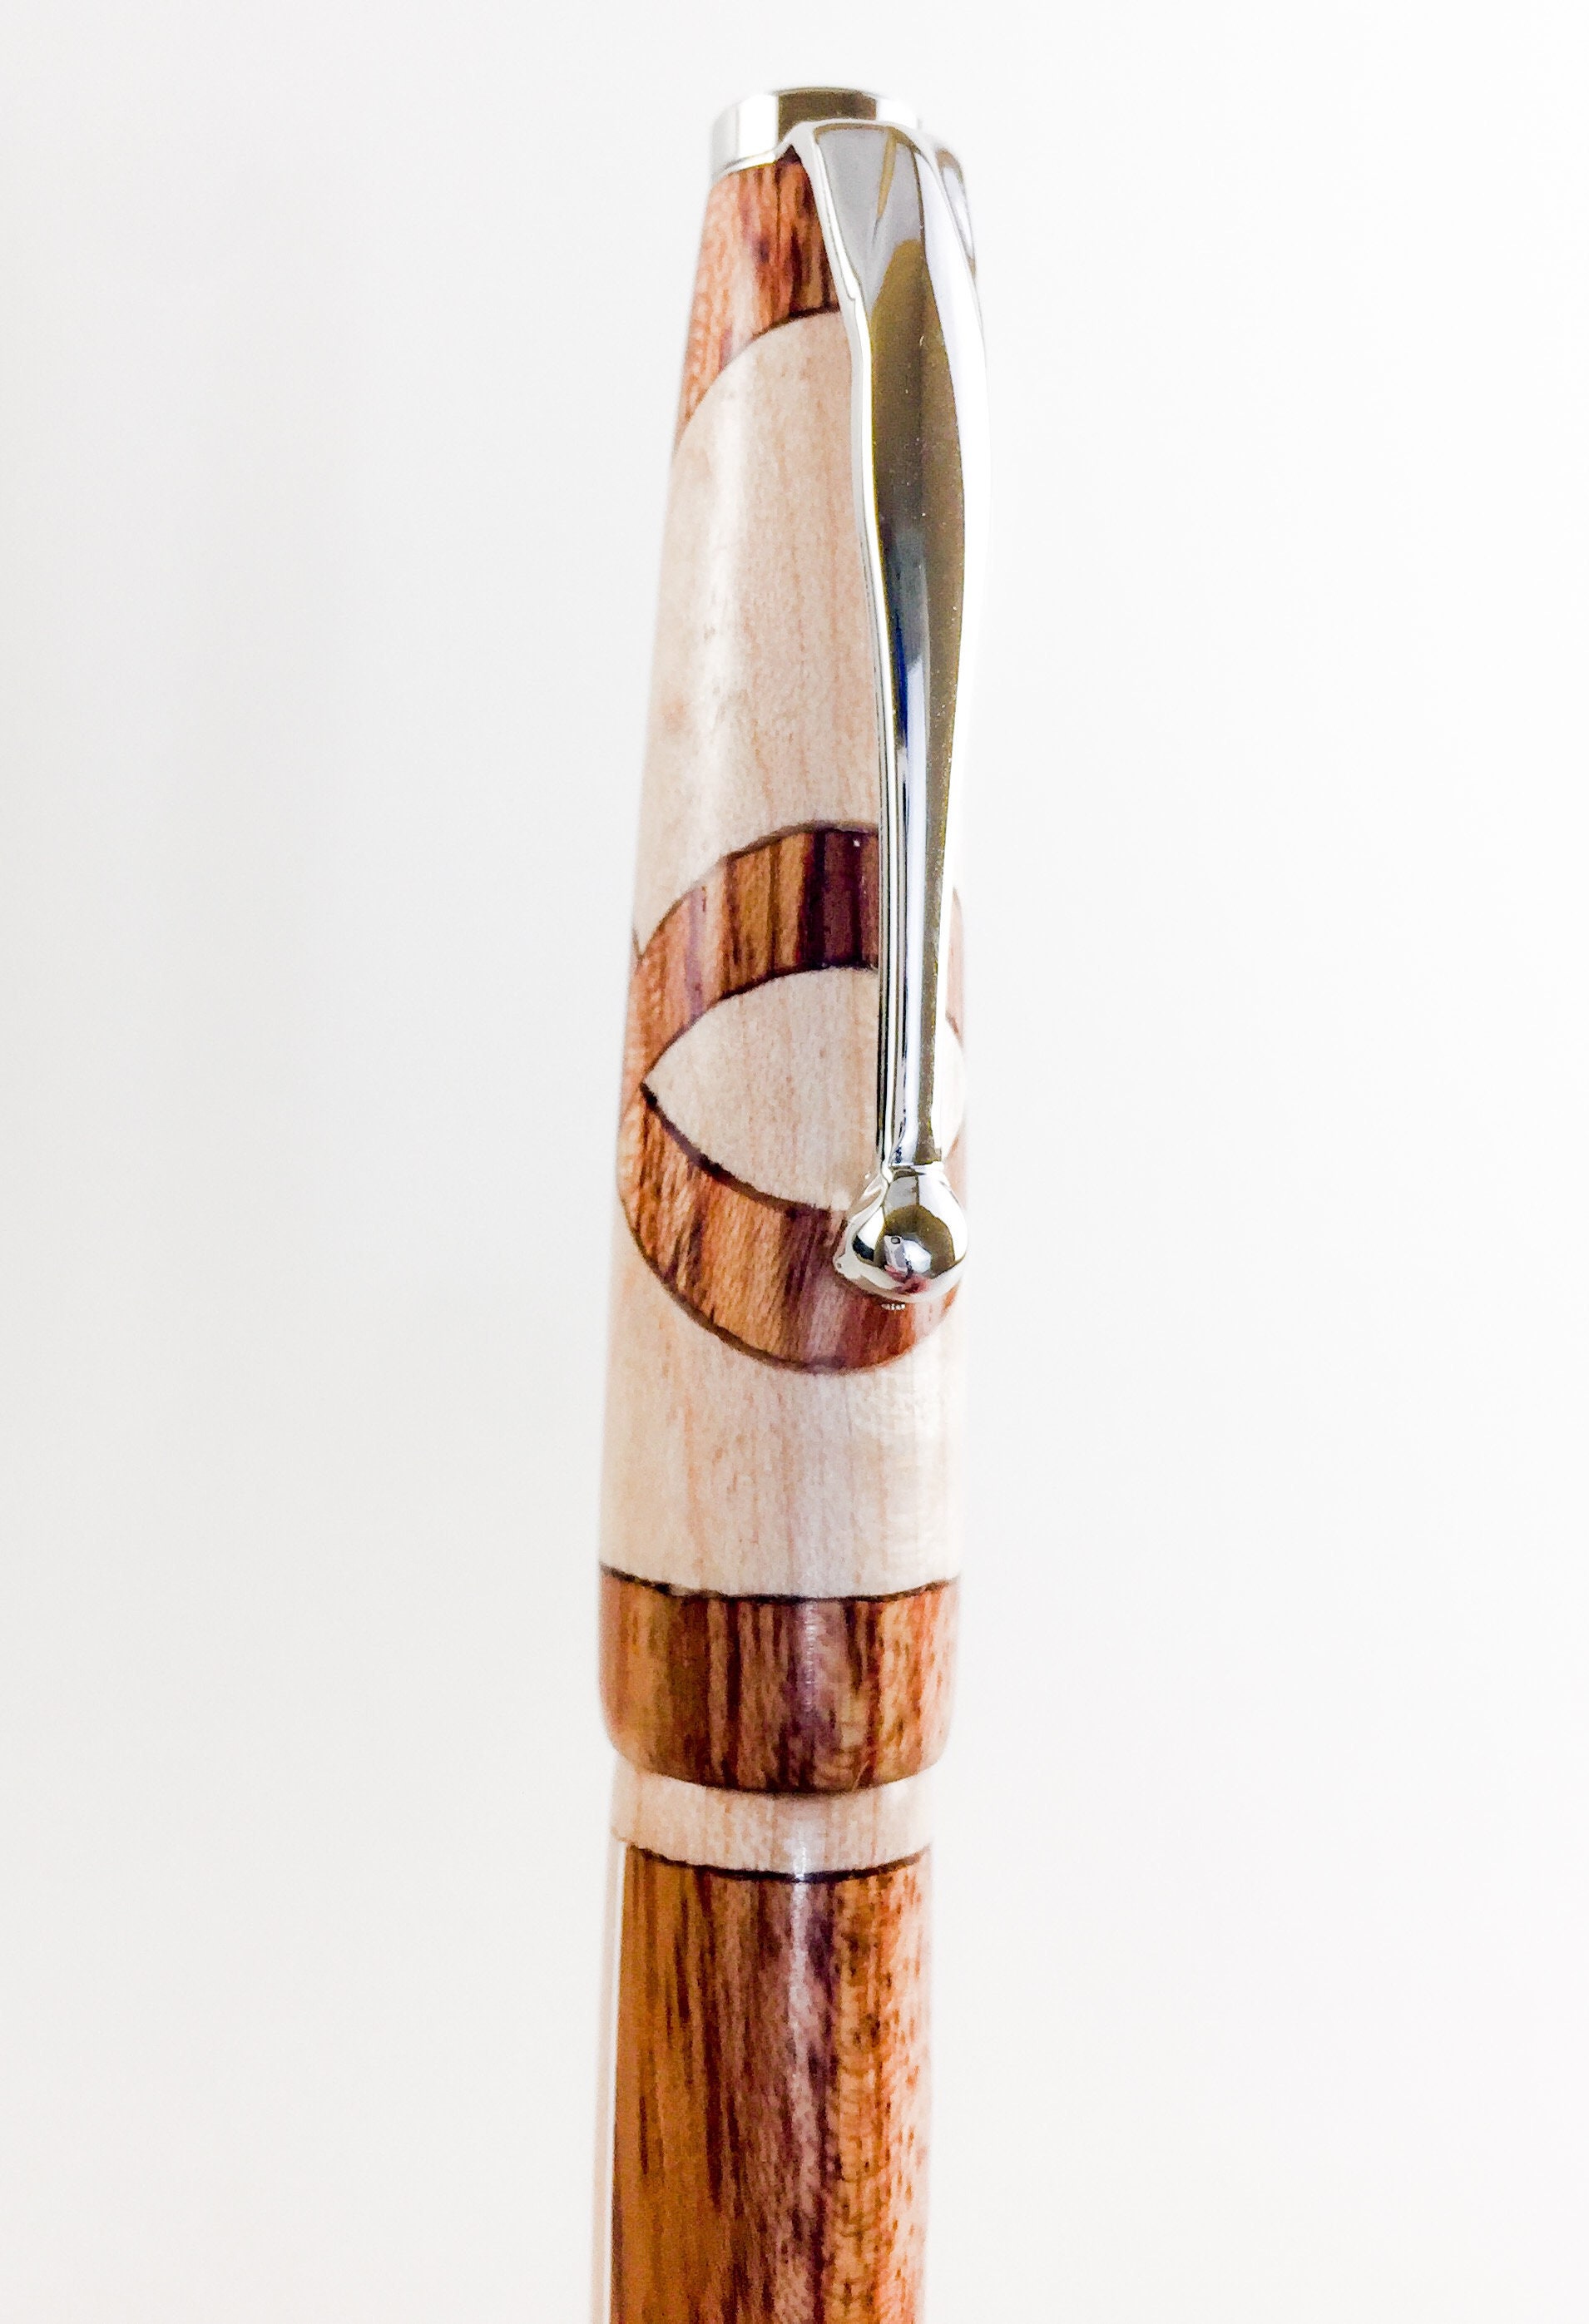 Hand Made Handmade / Hand Crafted Segmented Wooden Pen, Ballpoint,  Rollerball, Or Fountain by WoodenExpressions